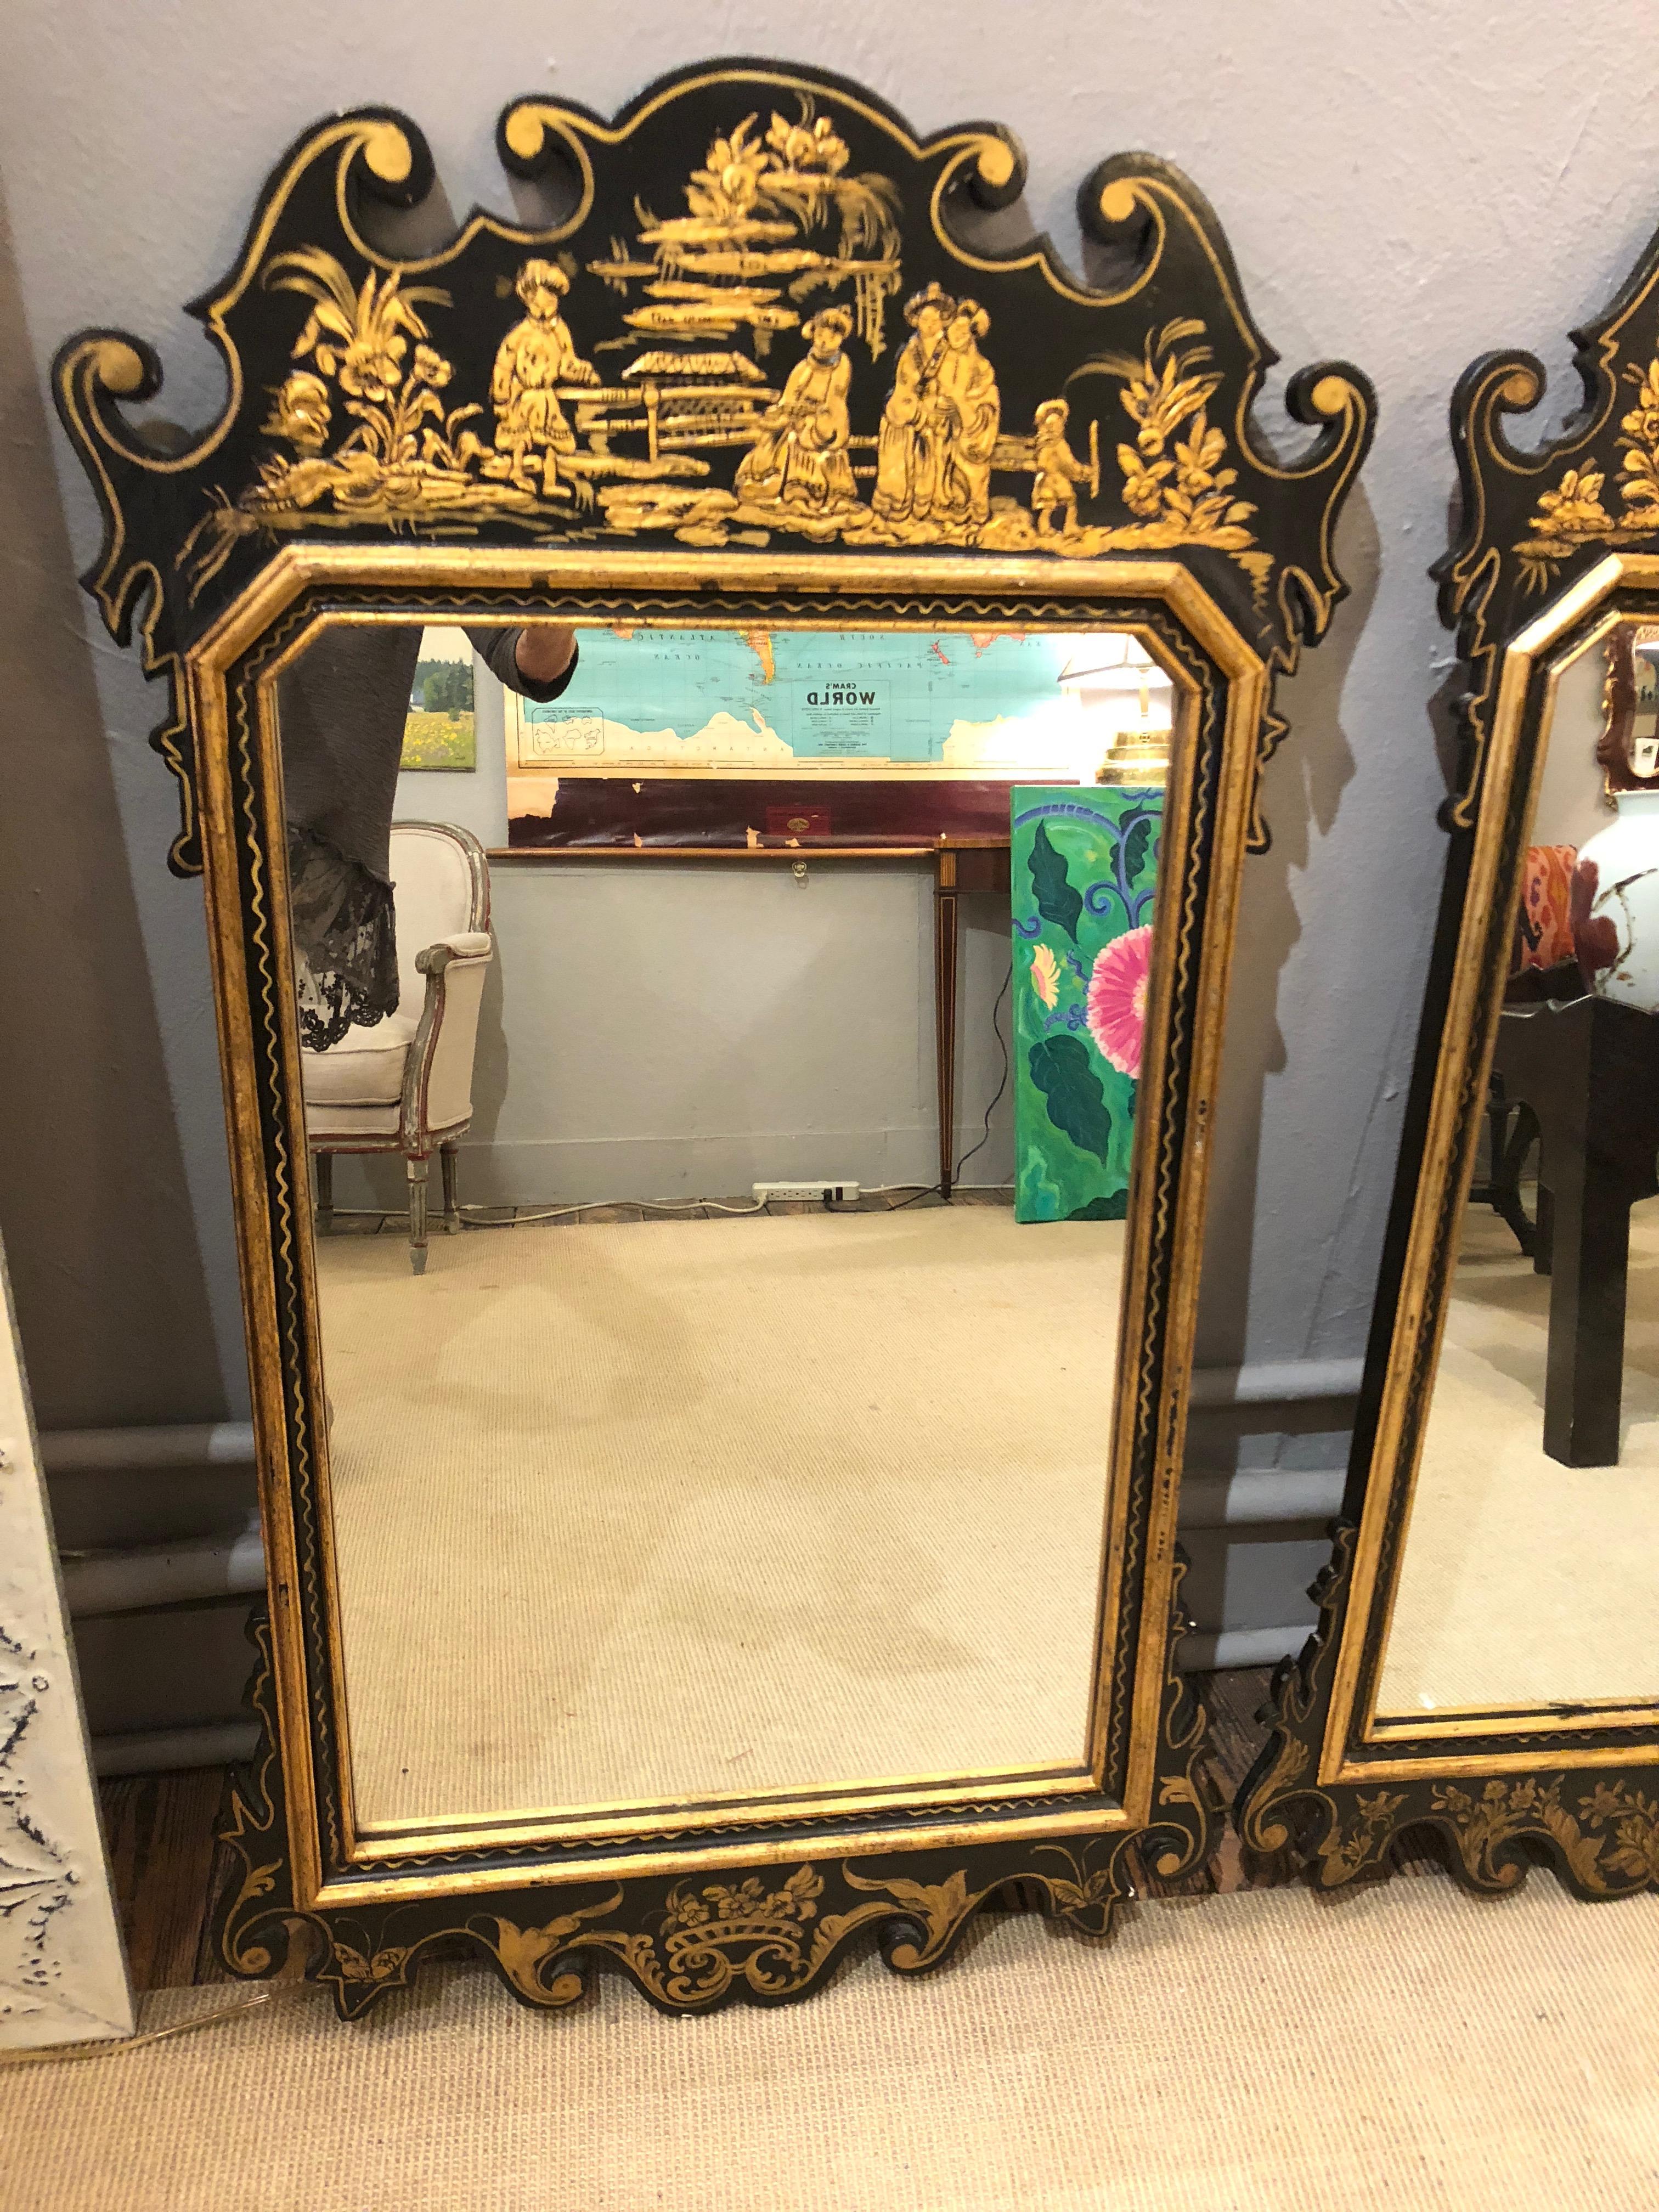 Pair of glamorous black and gold hand painted Chinoiserie style mirrors, each with unique decoration including Asian figures, pagoda, bamboo, etc.